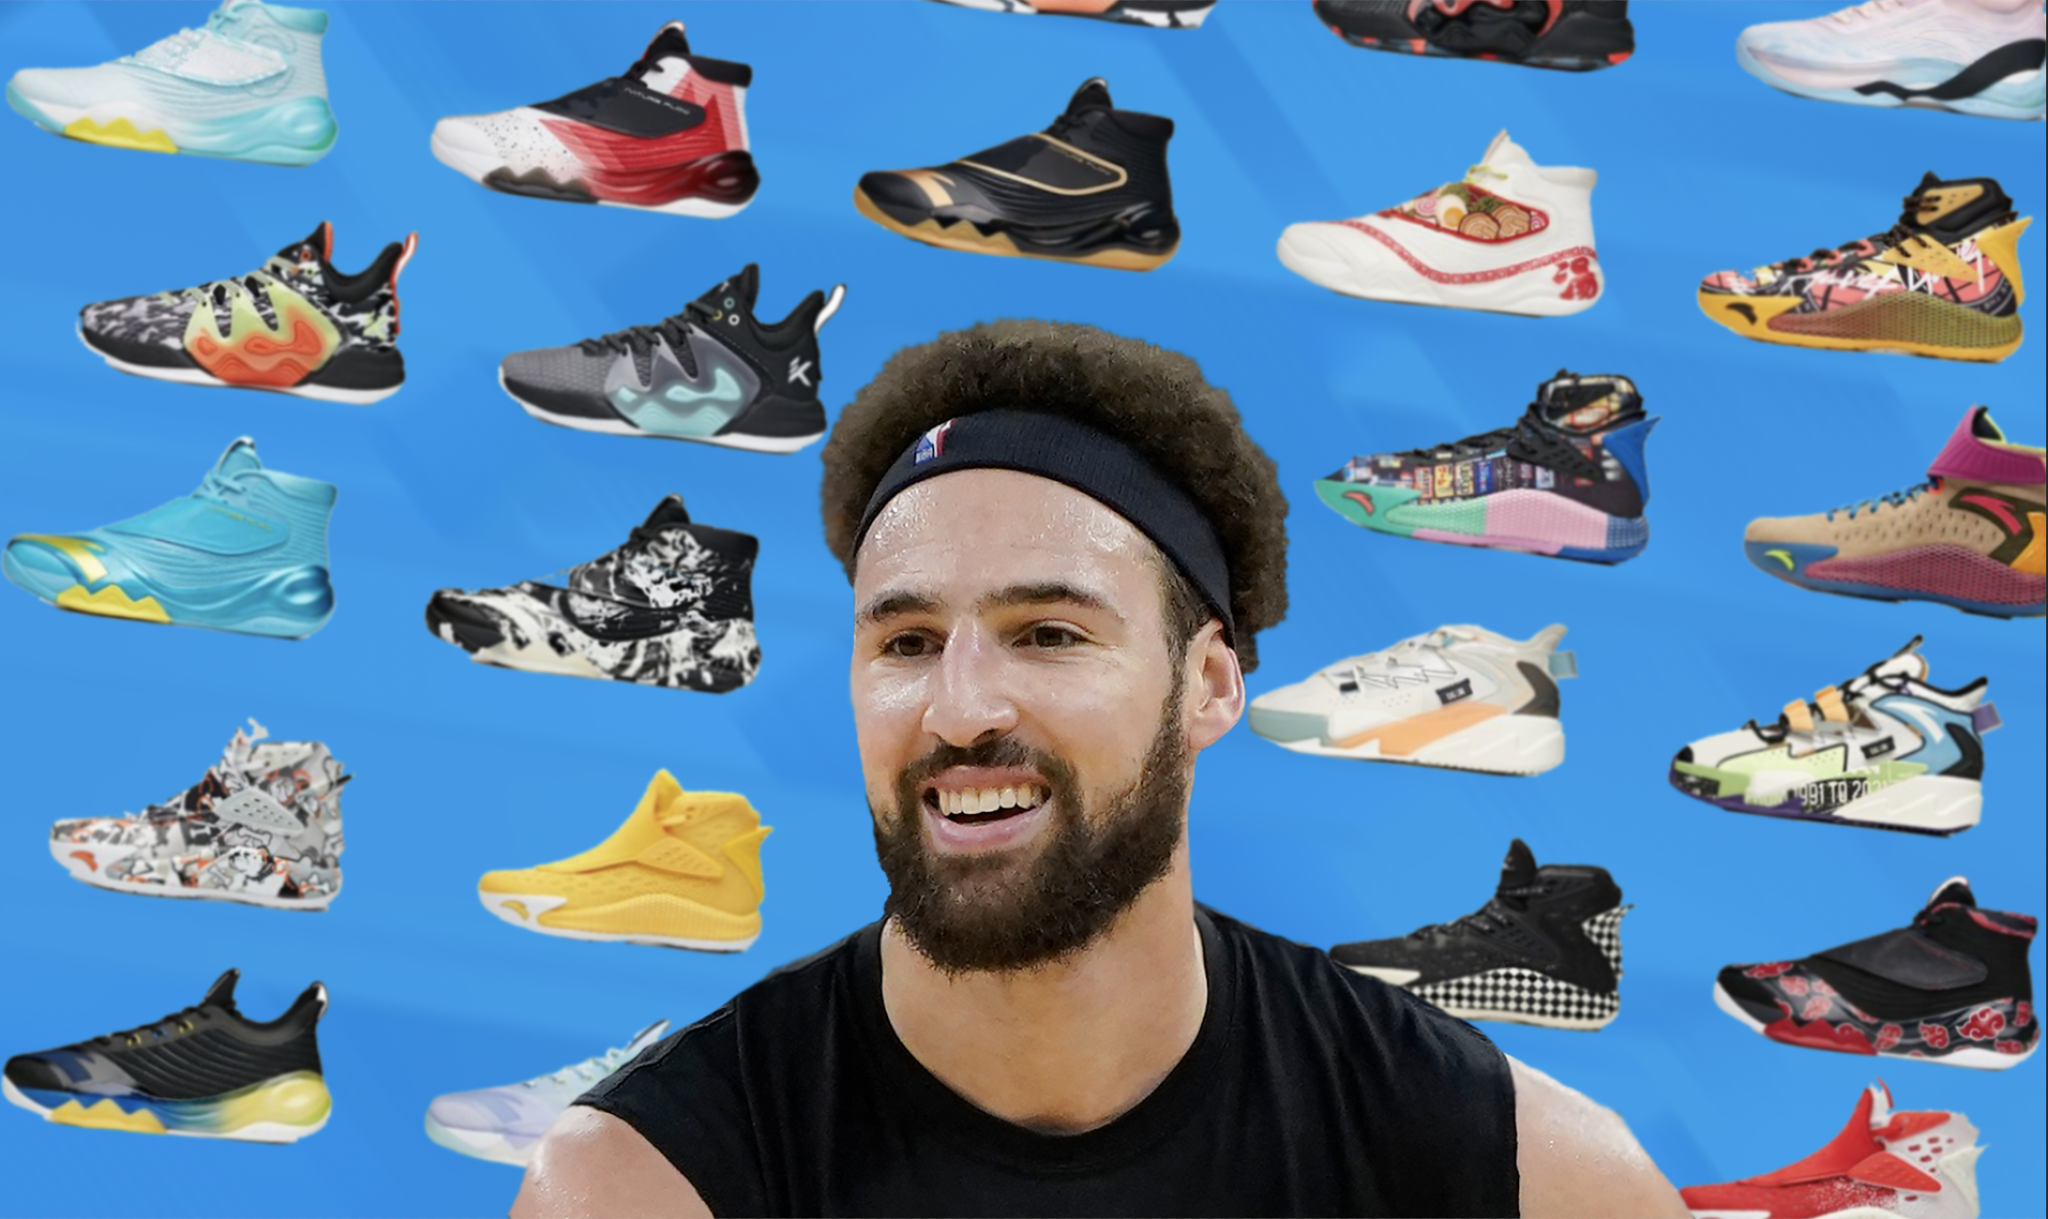 Anta basketball shoes worn by pro basketball players